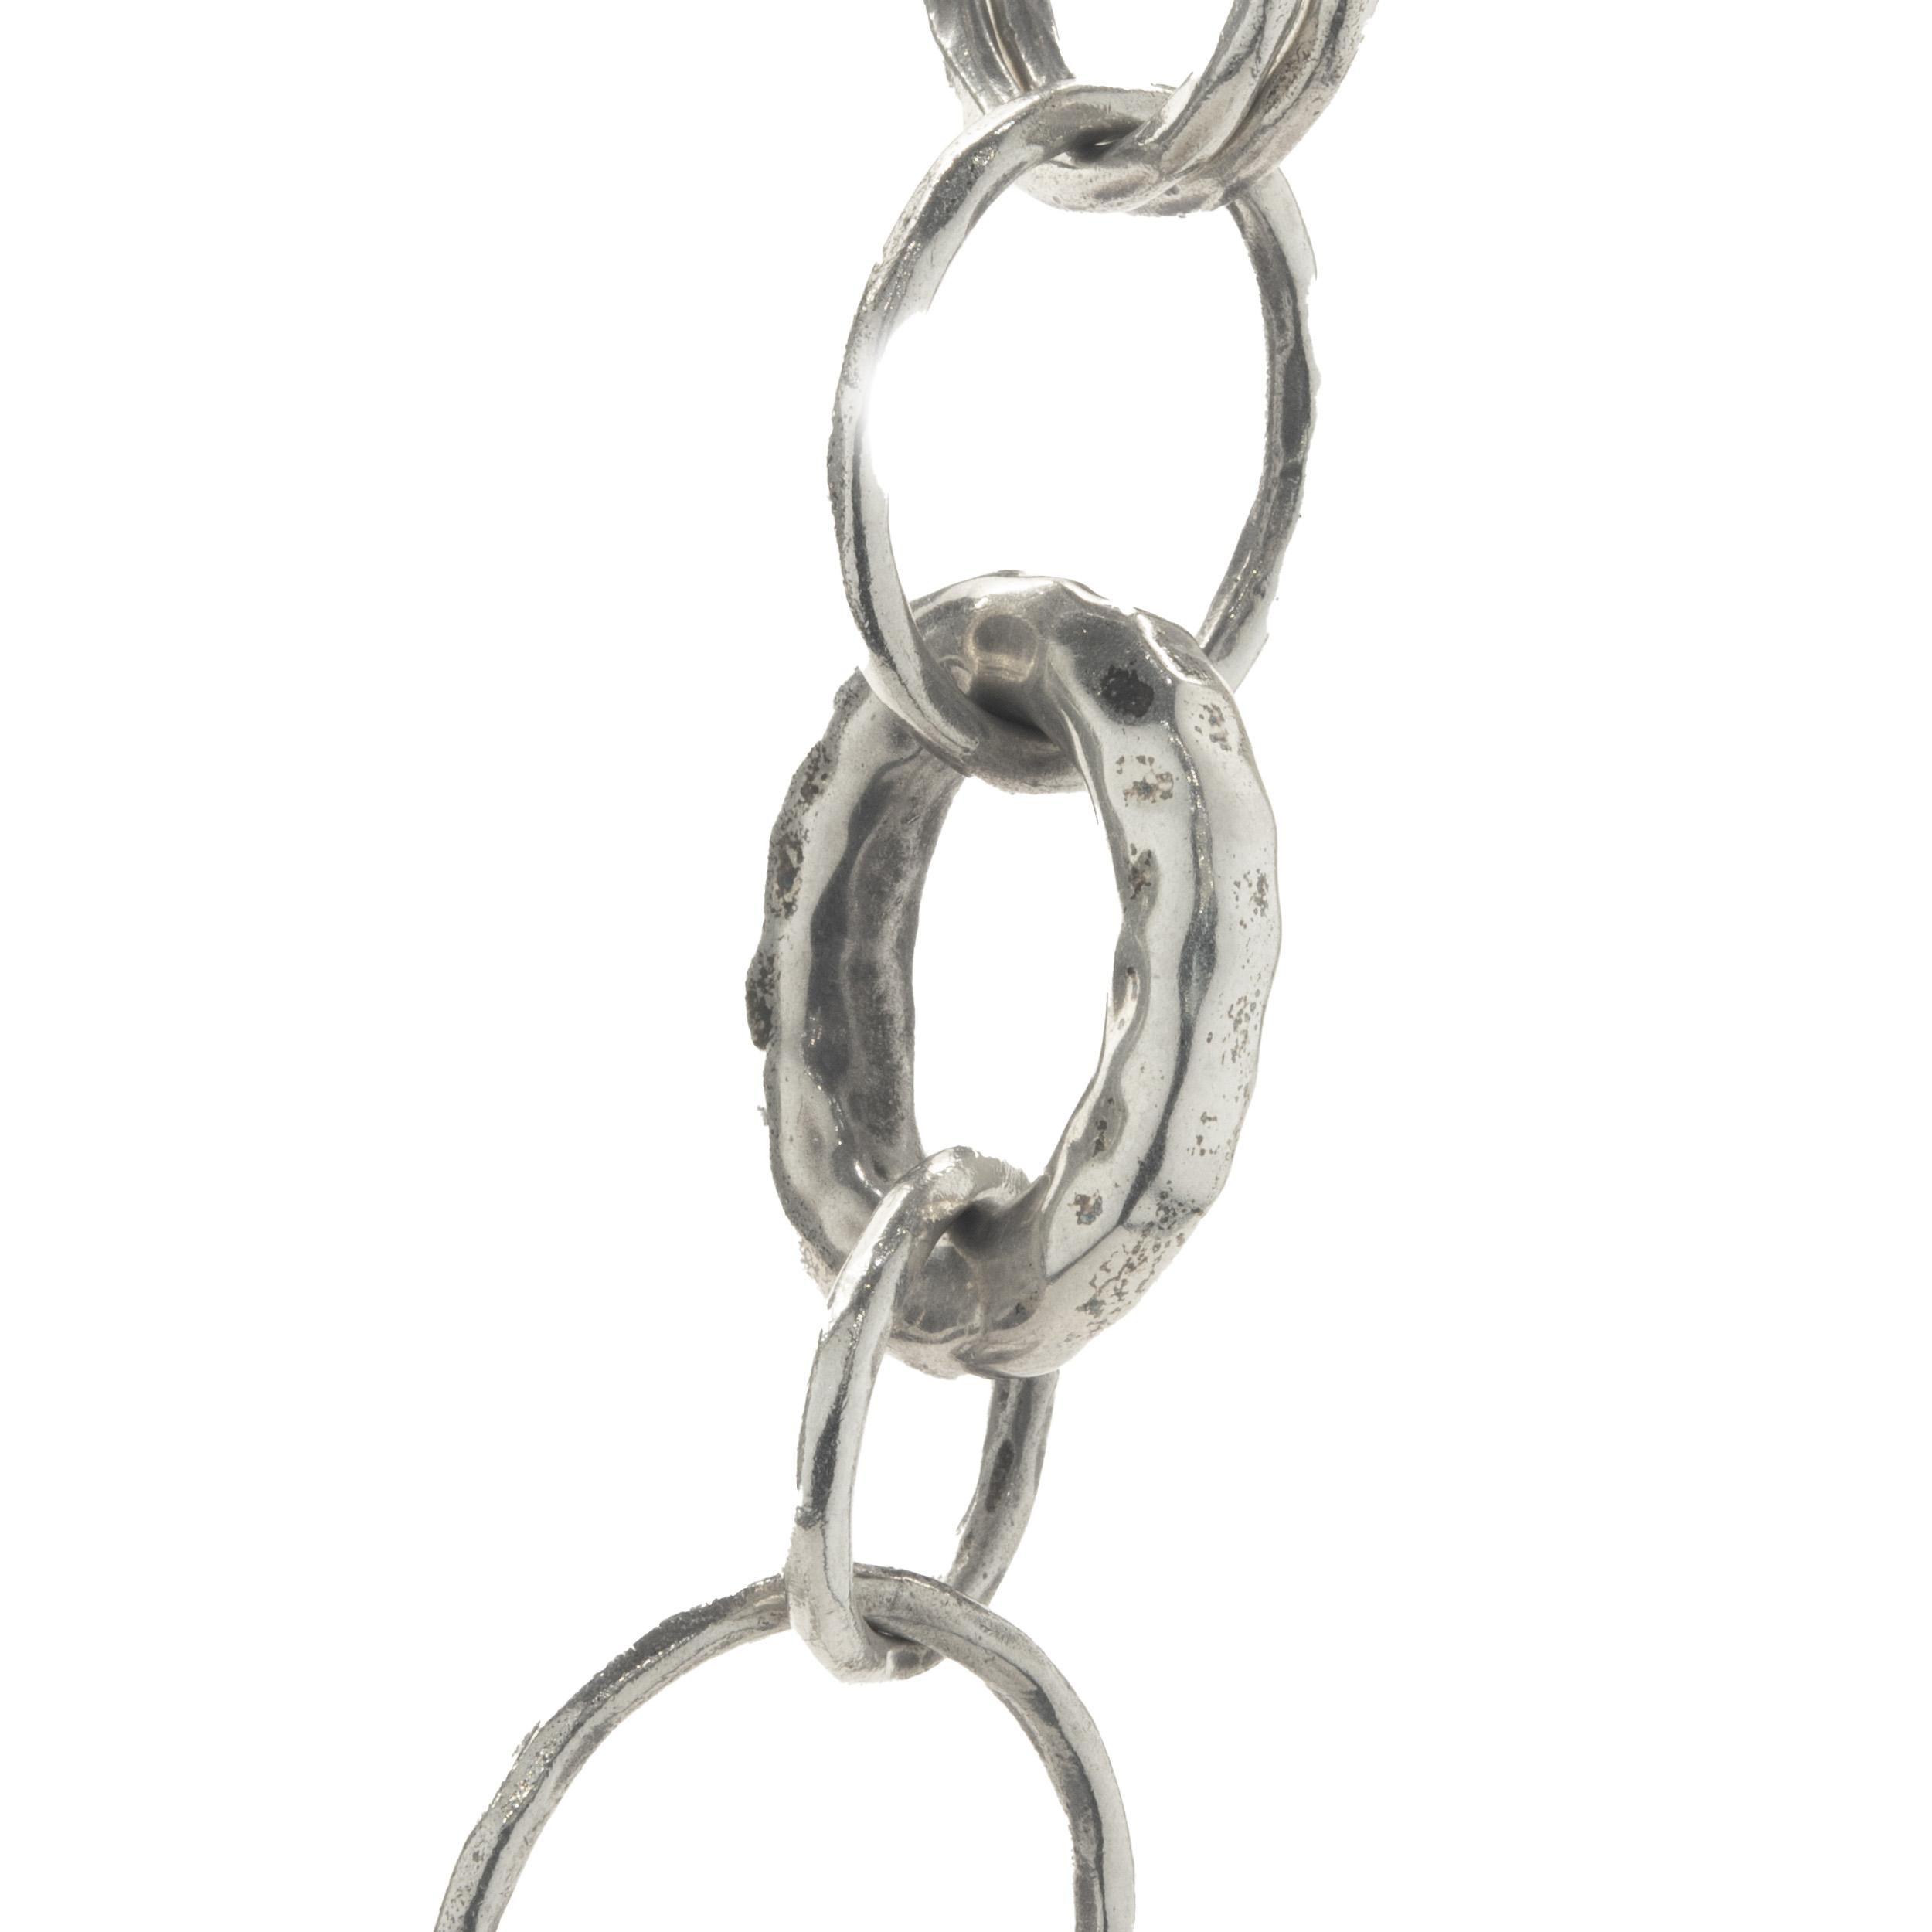 Designer: Ippolita
Material: sterling silver
Weight: 69.76 grams
Measurement: necklace measures 18-inches